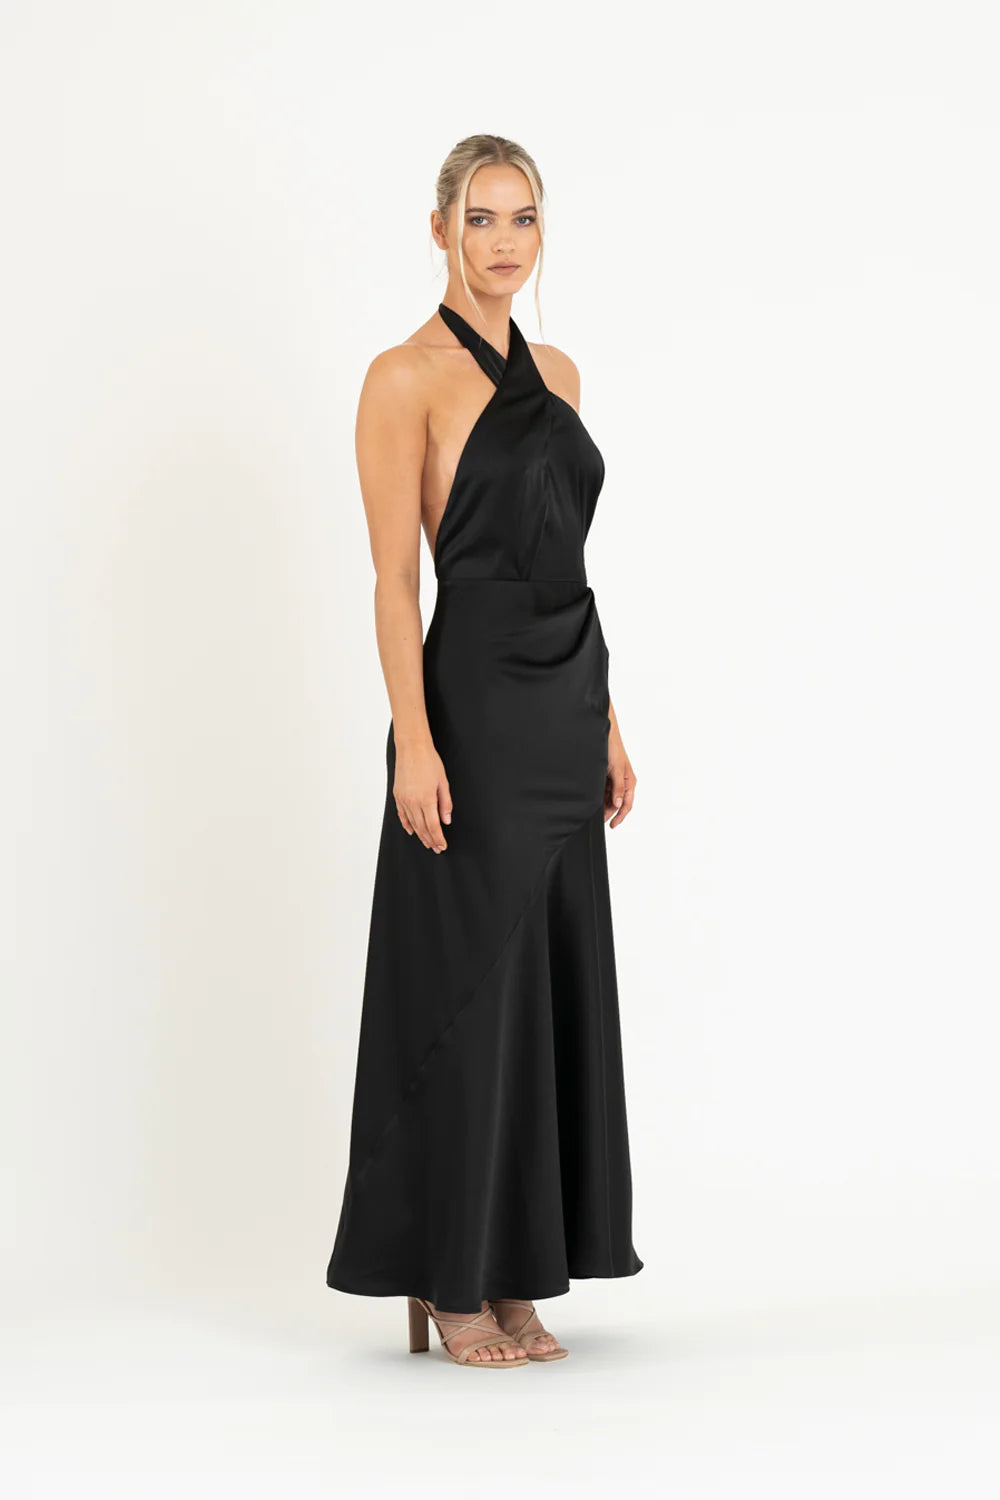 One Fell Swoop Zion Maxi, New Black